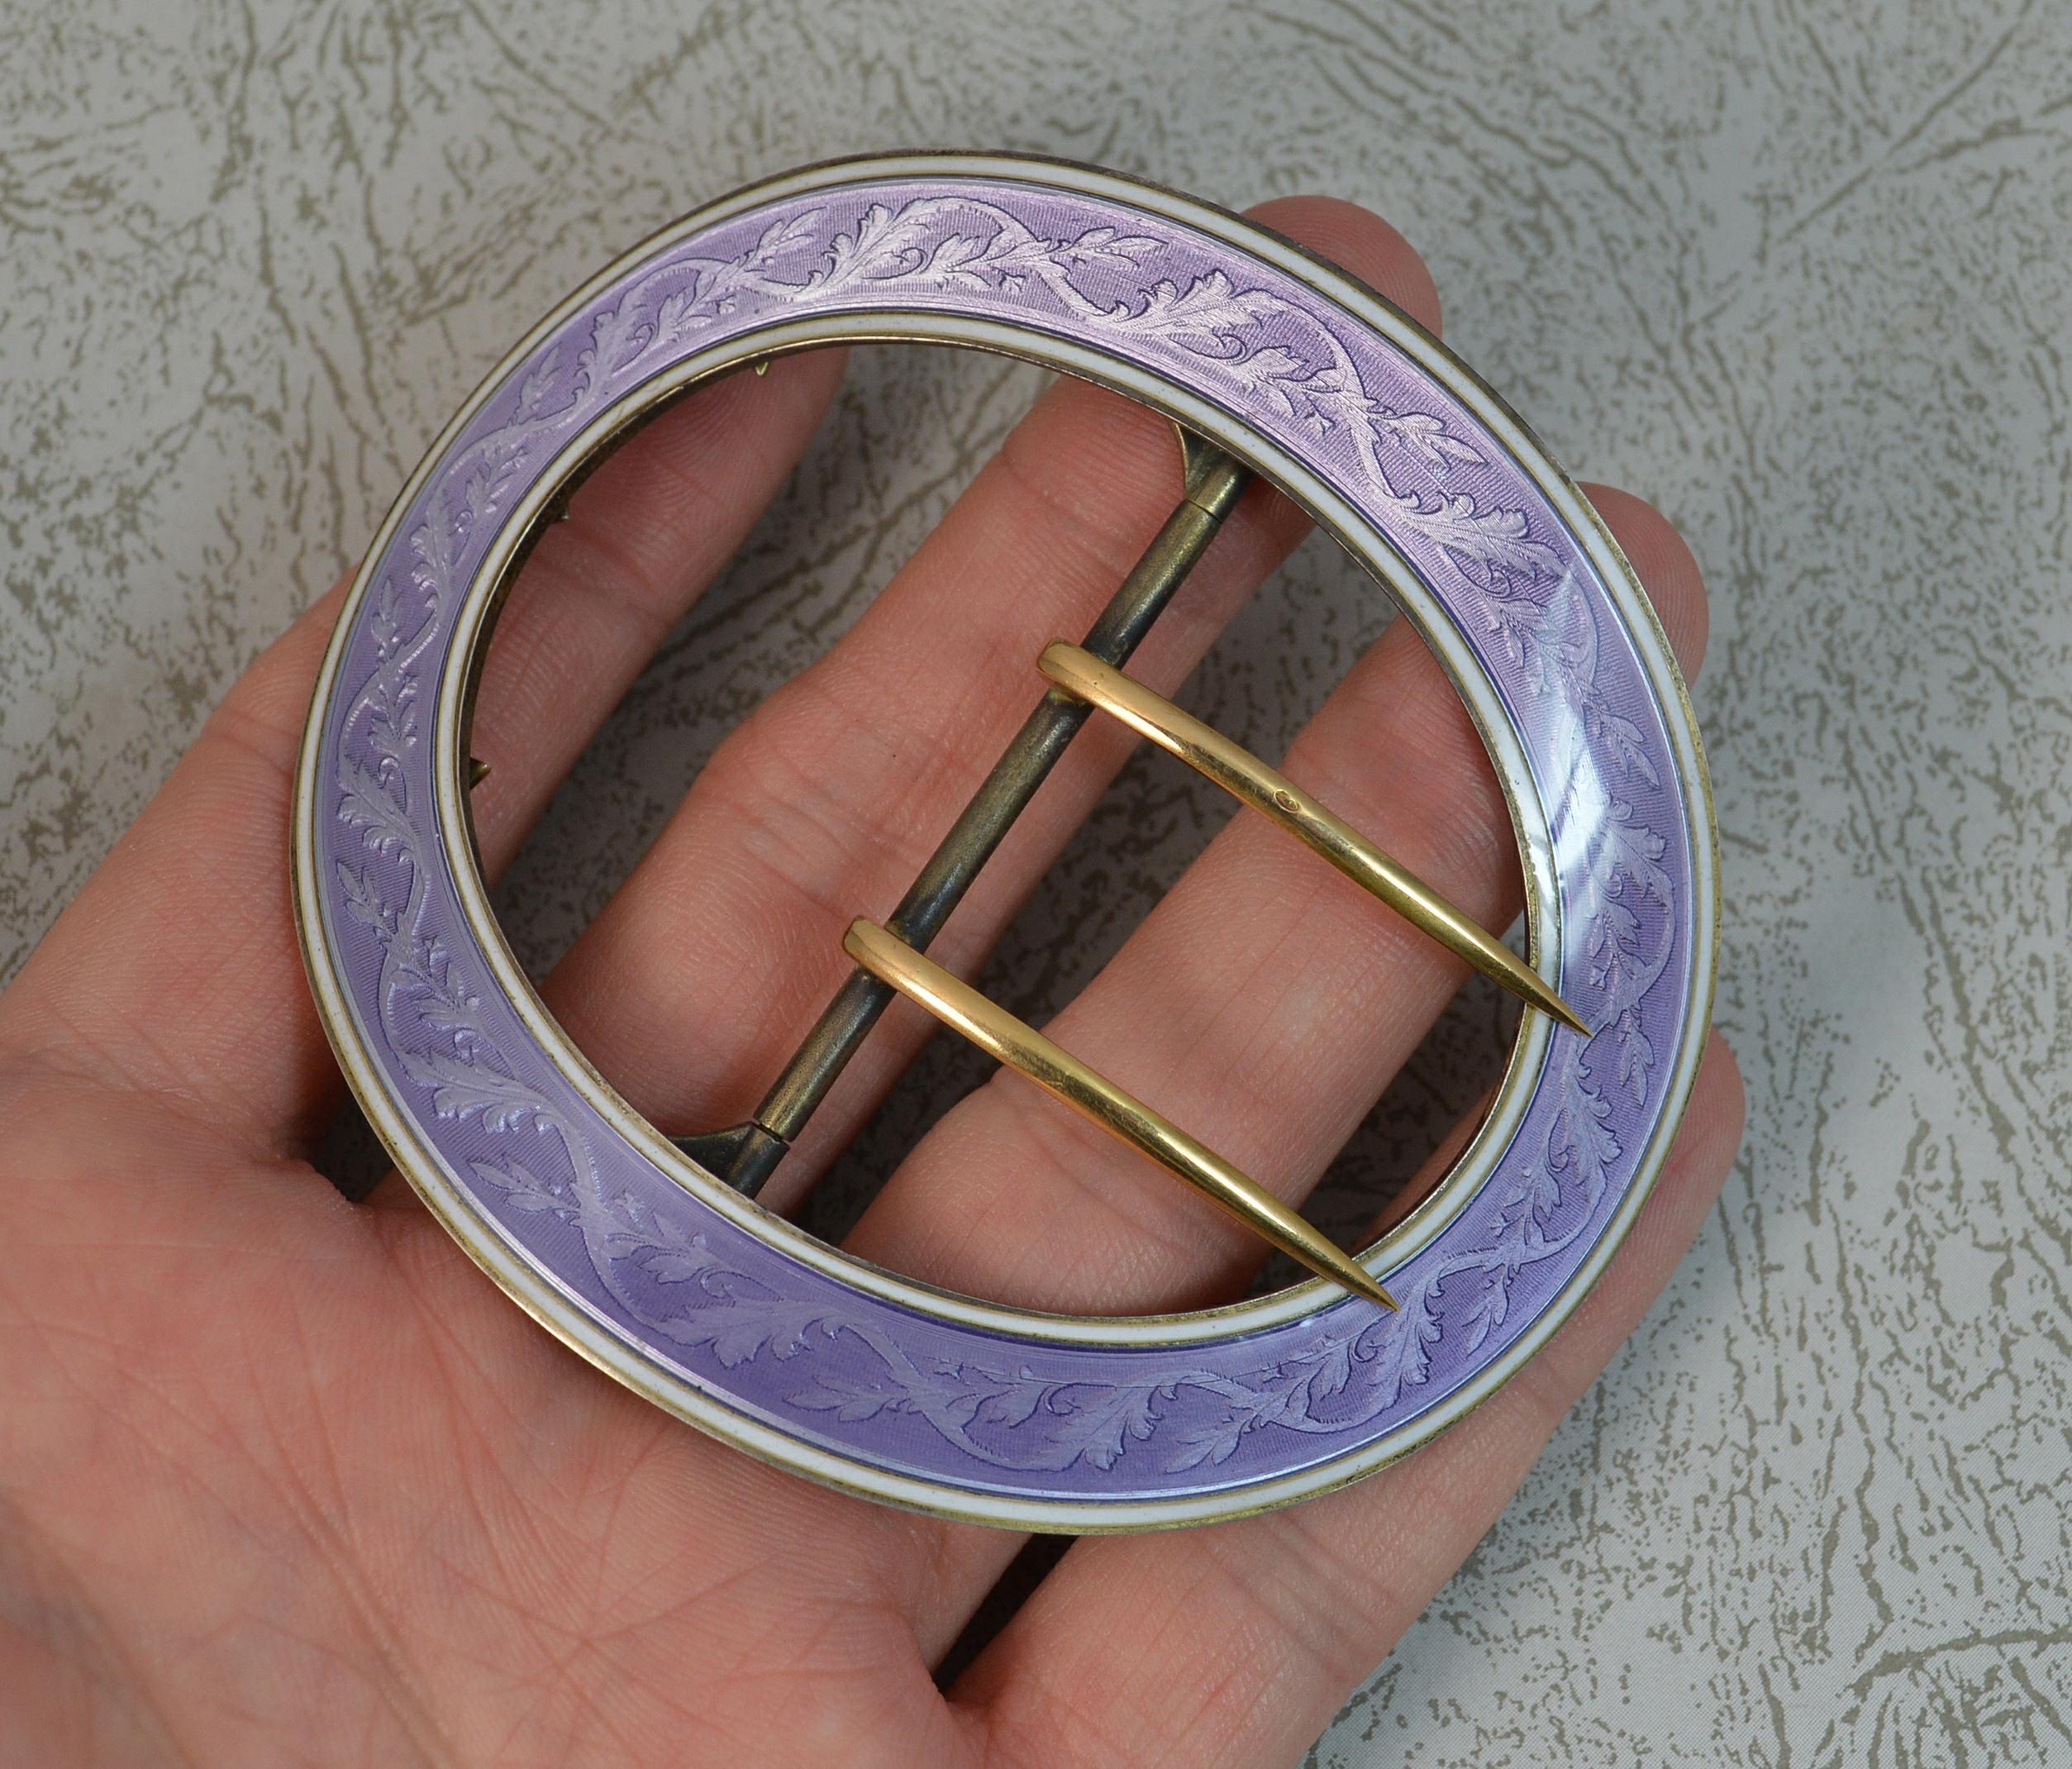 A superb buckle.
Sterling silver example.
Two 18 carat yellow gold prongs.
Designed with a fine lilac purple coloured guilloche enamel with white border.

Hallmarks ; full marks to reverse, French eagle to gold

Weight ; 54.4 grams all in

Size ;